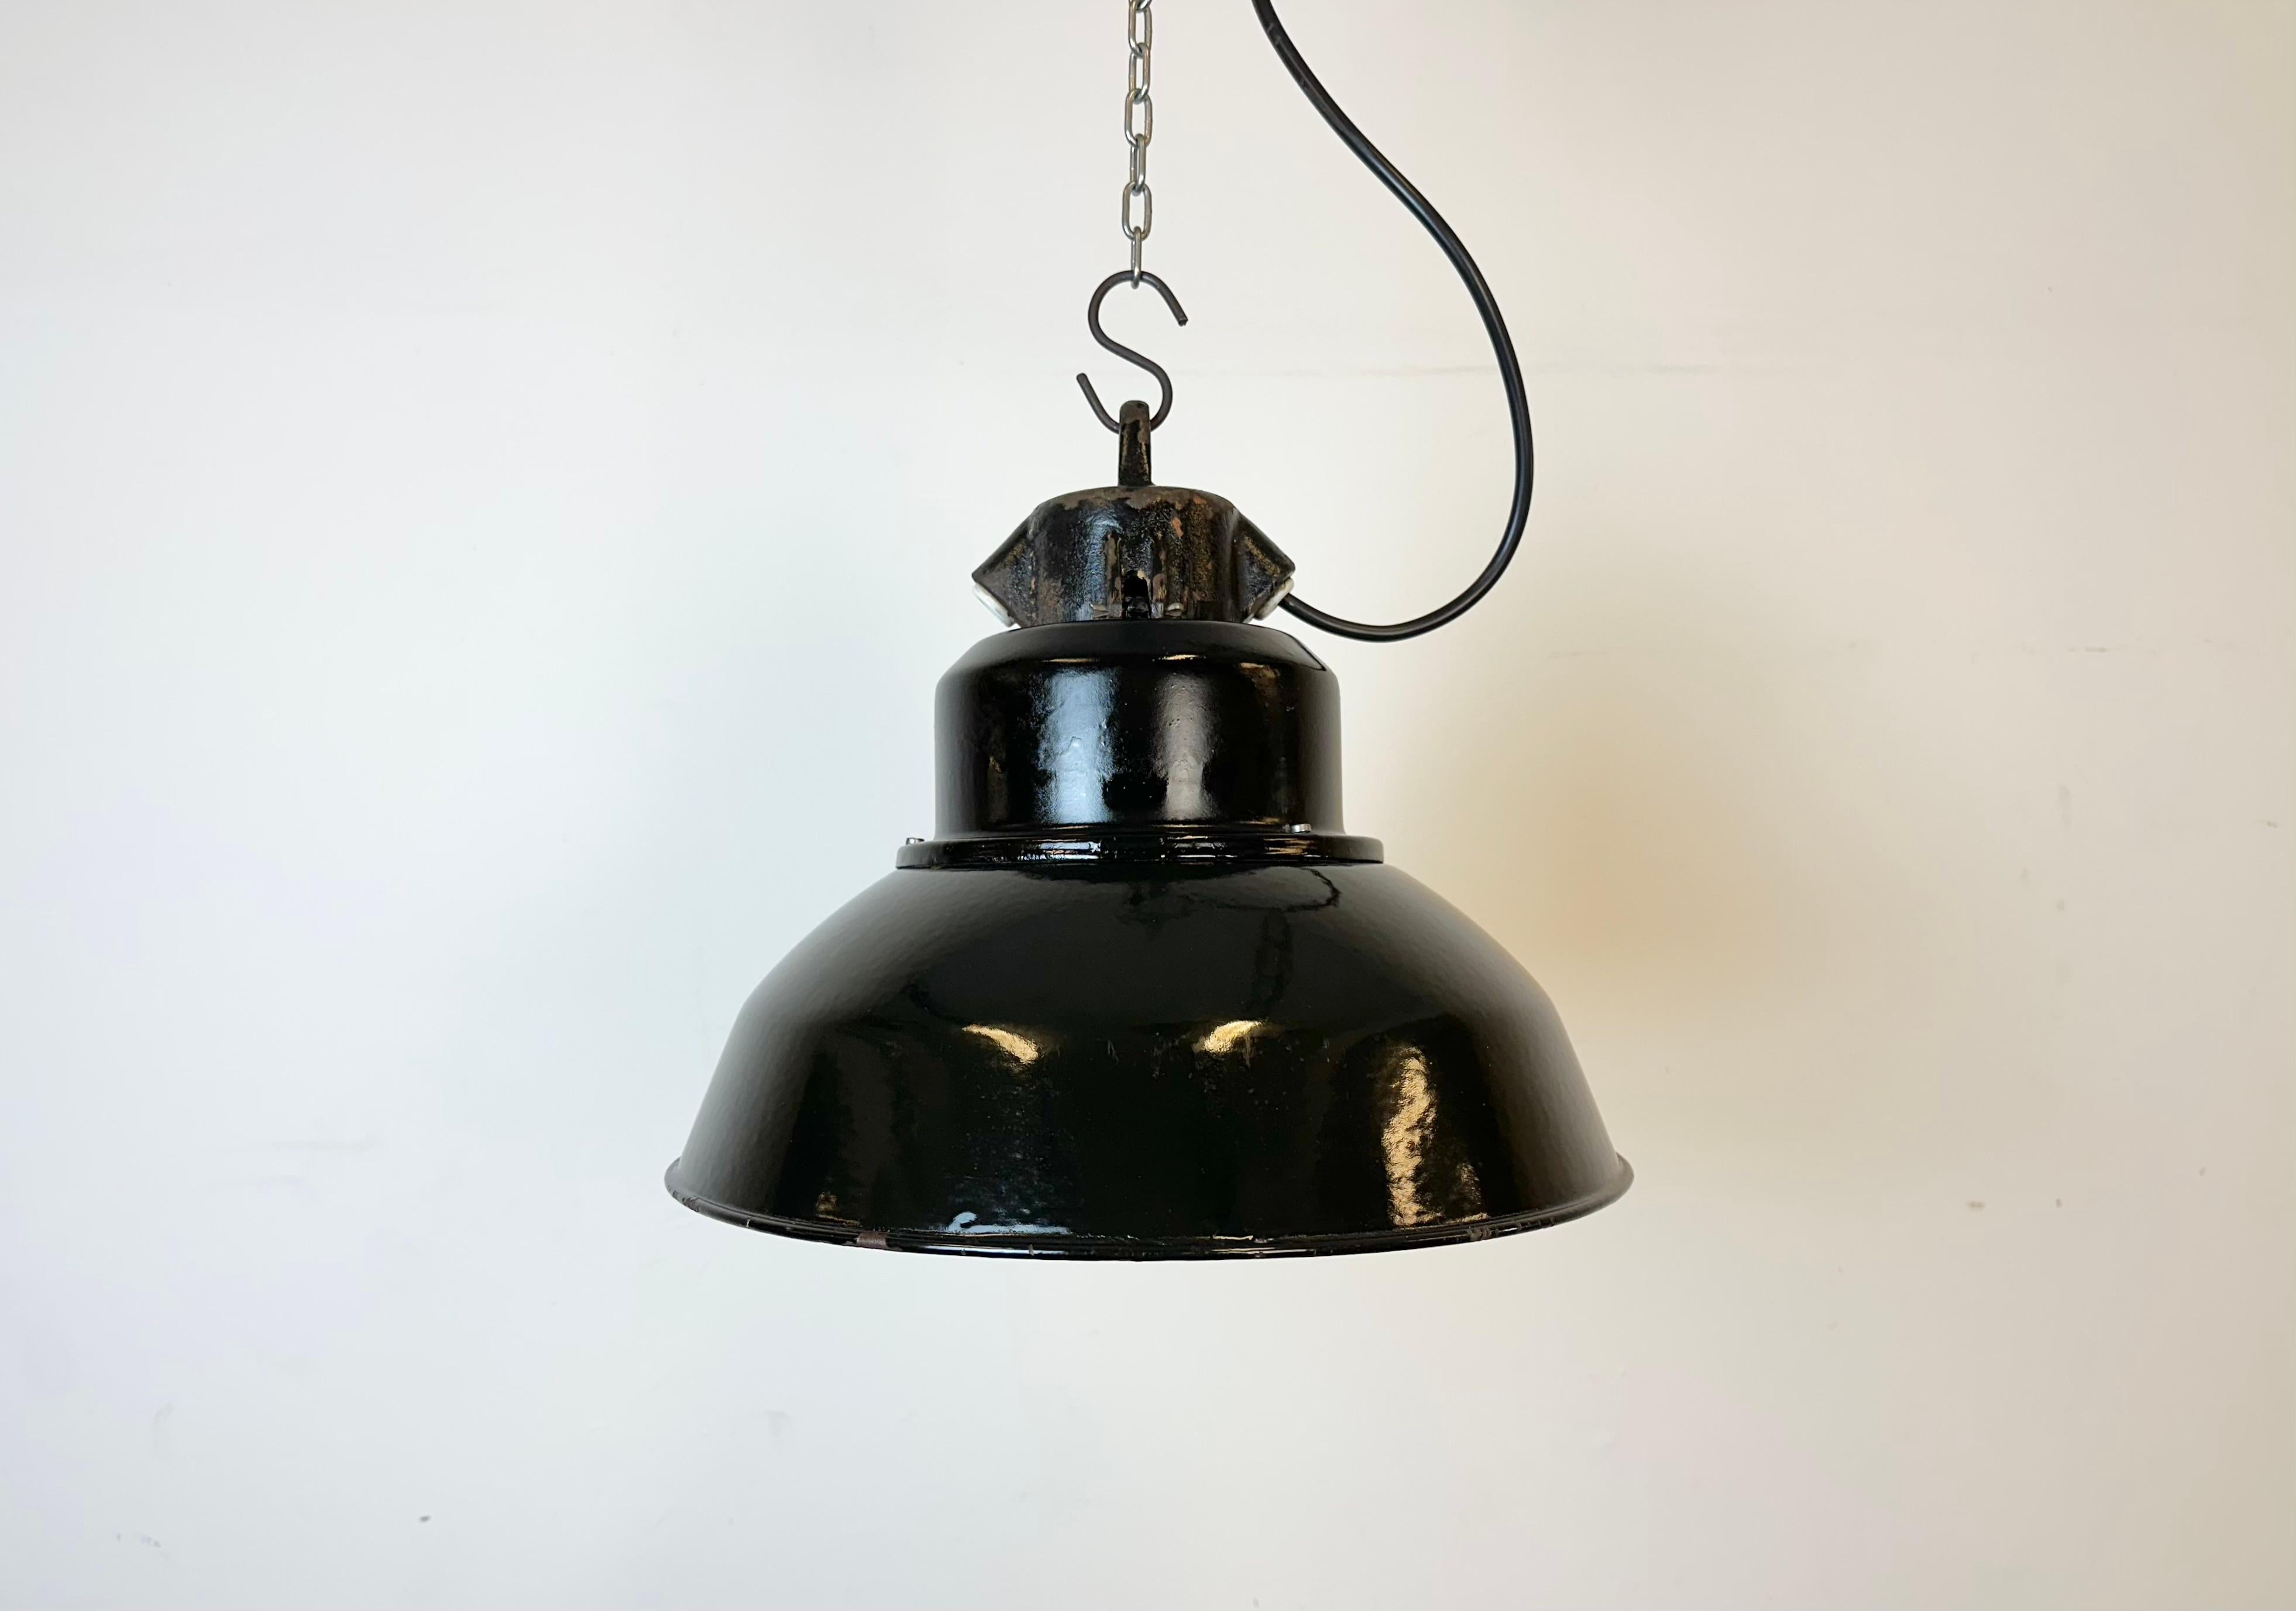 Industrial black enamel pendant light made by Elektrosvit in former Czechoslovakia during the 1960s. White enamel inside the shade. Cast iron top. The porcelain socket requires E 27/ E26 light bulbs. New wire. Fully functional. The weight of the